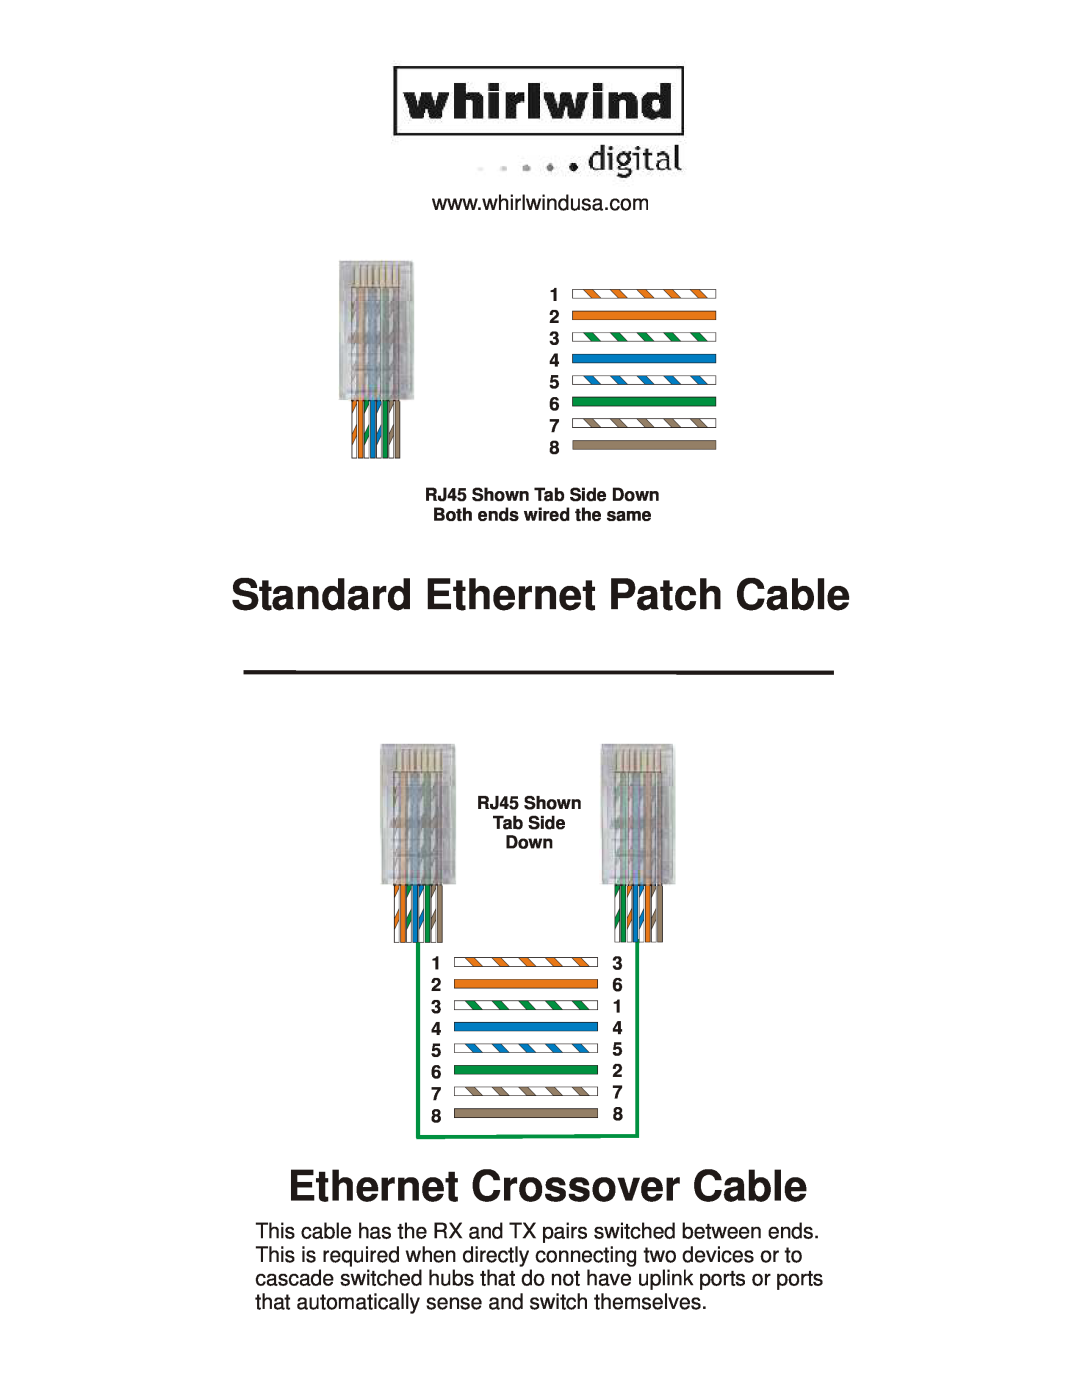 Whirlwind manual Standard Ethernet Patch Cable, Ethernet Crossover Cable, RJ45 Shown Tab Side Down 